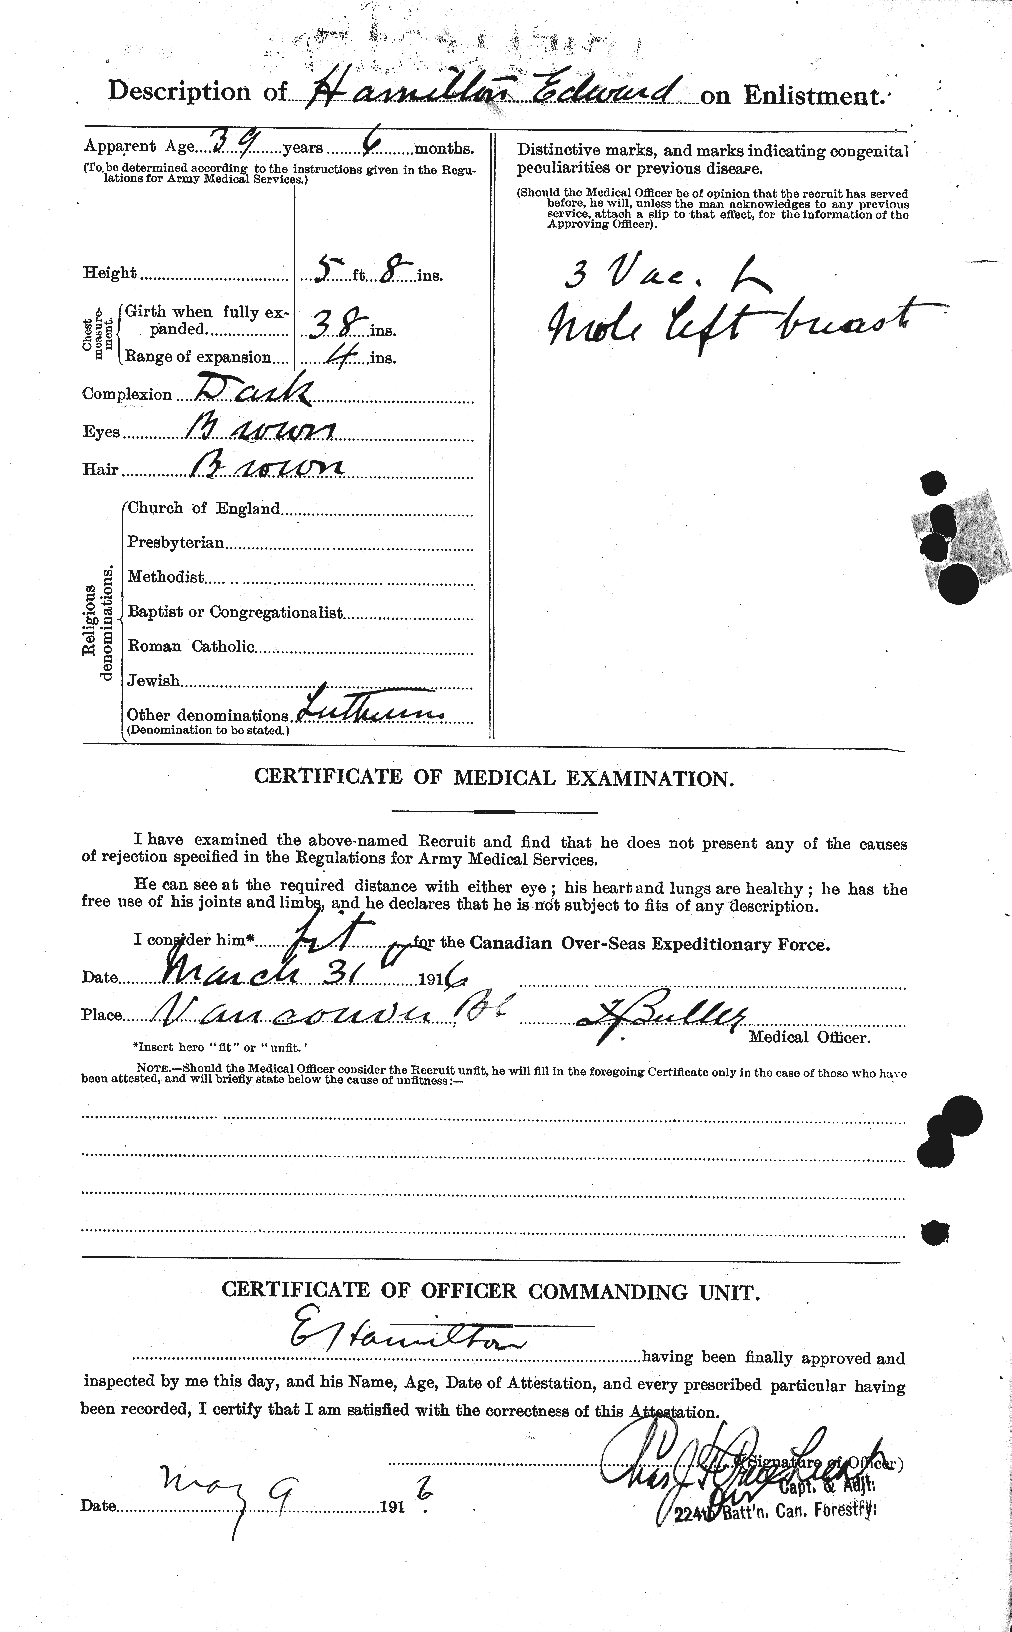 Personnel Records of the First World War - CEF 375375b